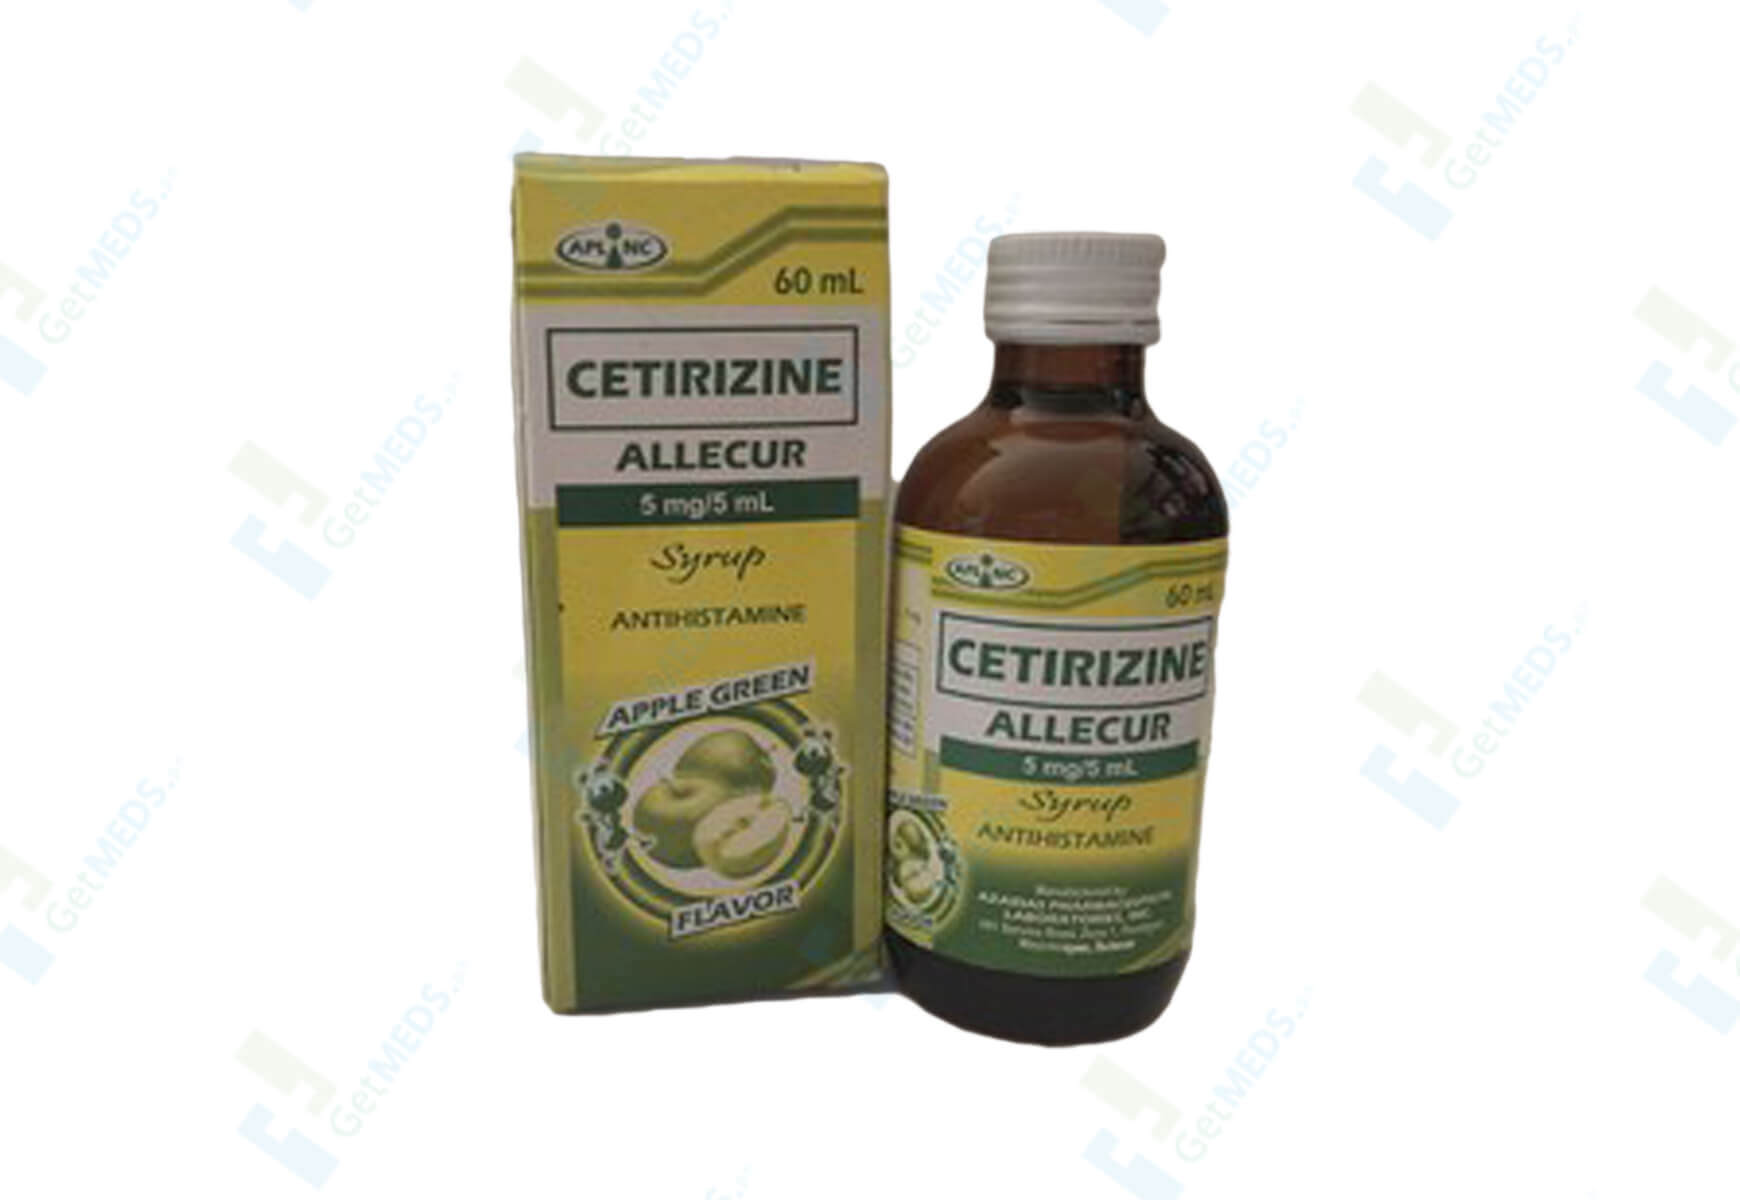 cetirizine for cough in Philippines